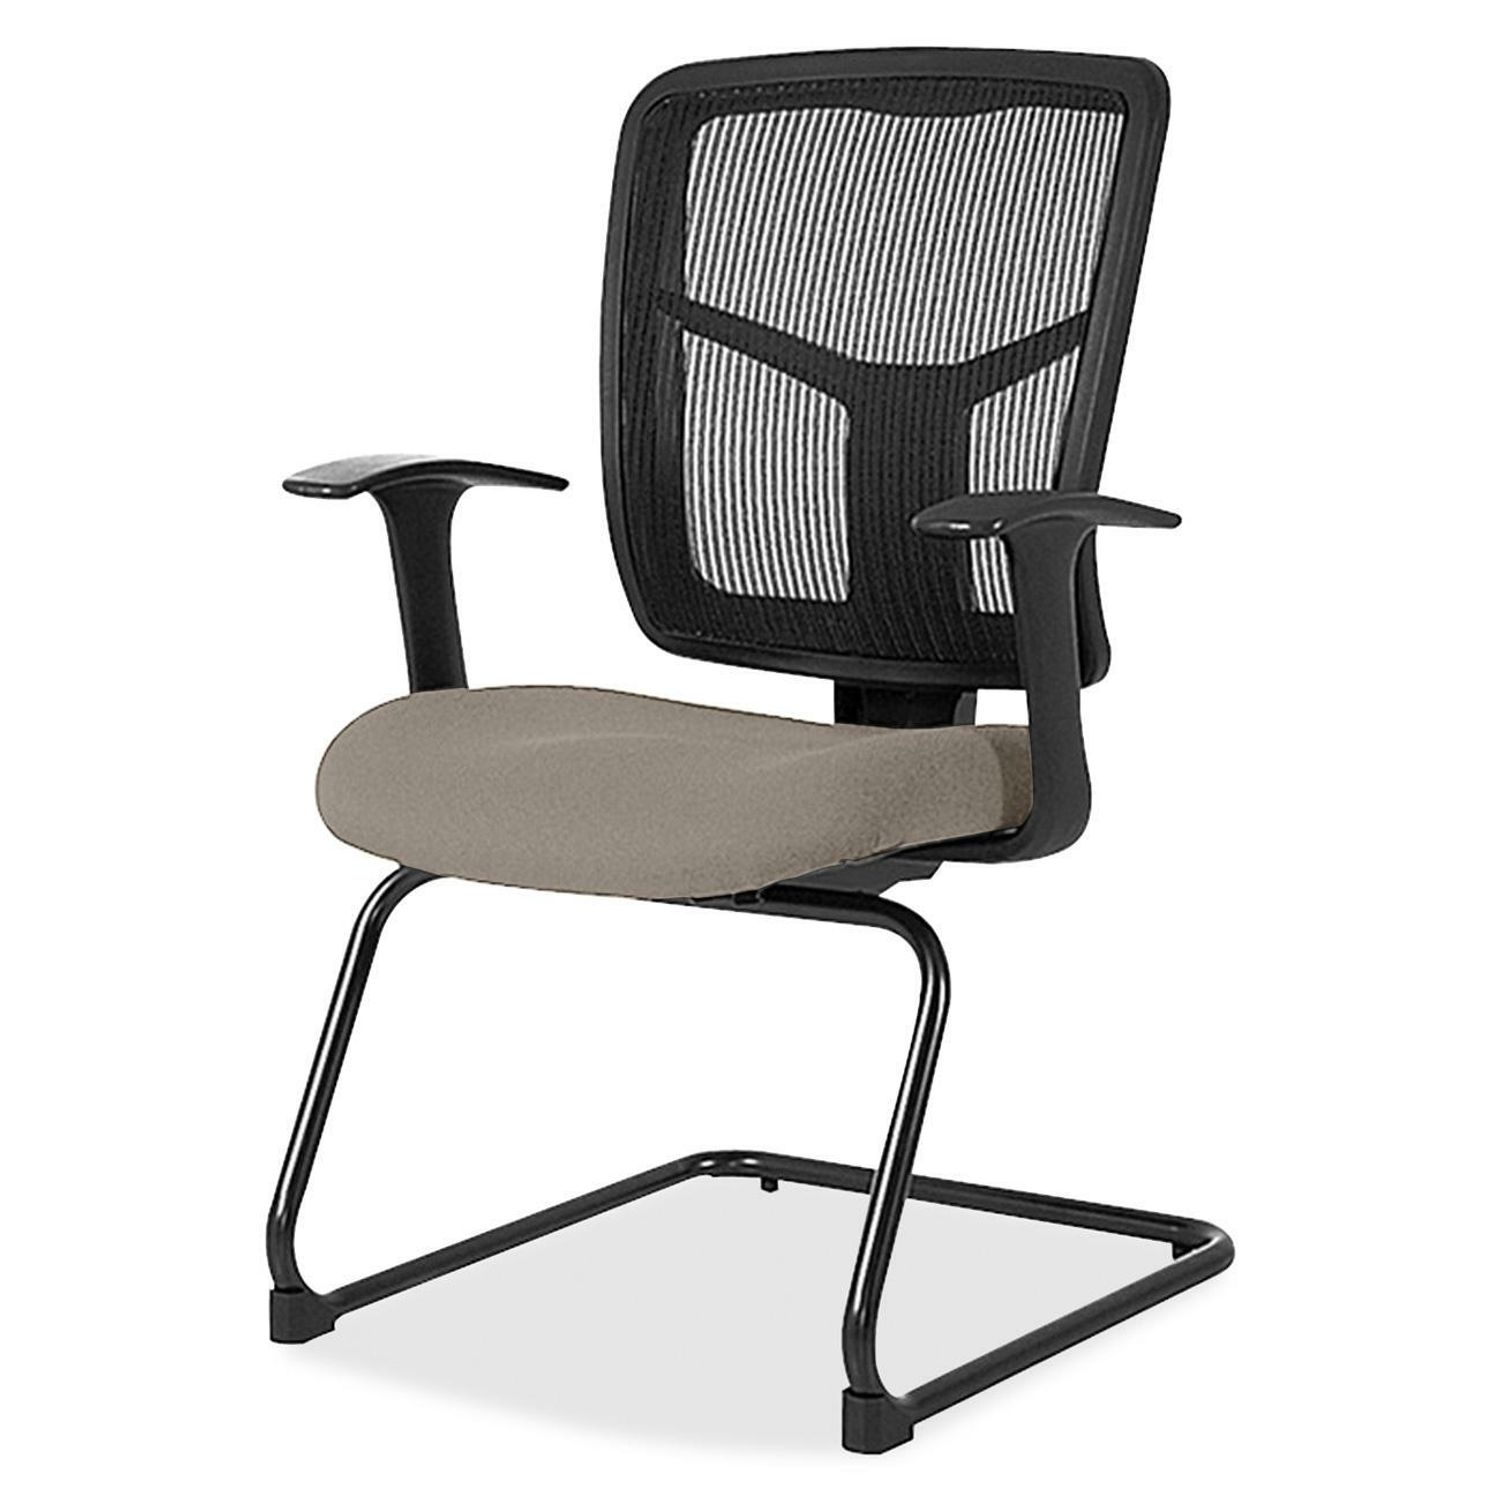 ErgoMesh Series Mesh Side Arm Guest Chair Insight Fossill Mesh, Fabric Seat, Black Mesh Back, Cantilever Base, Black, 1 Each